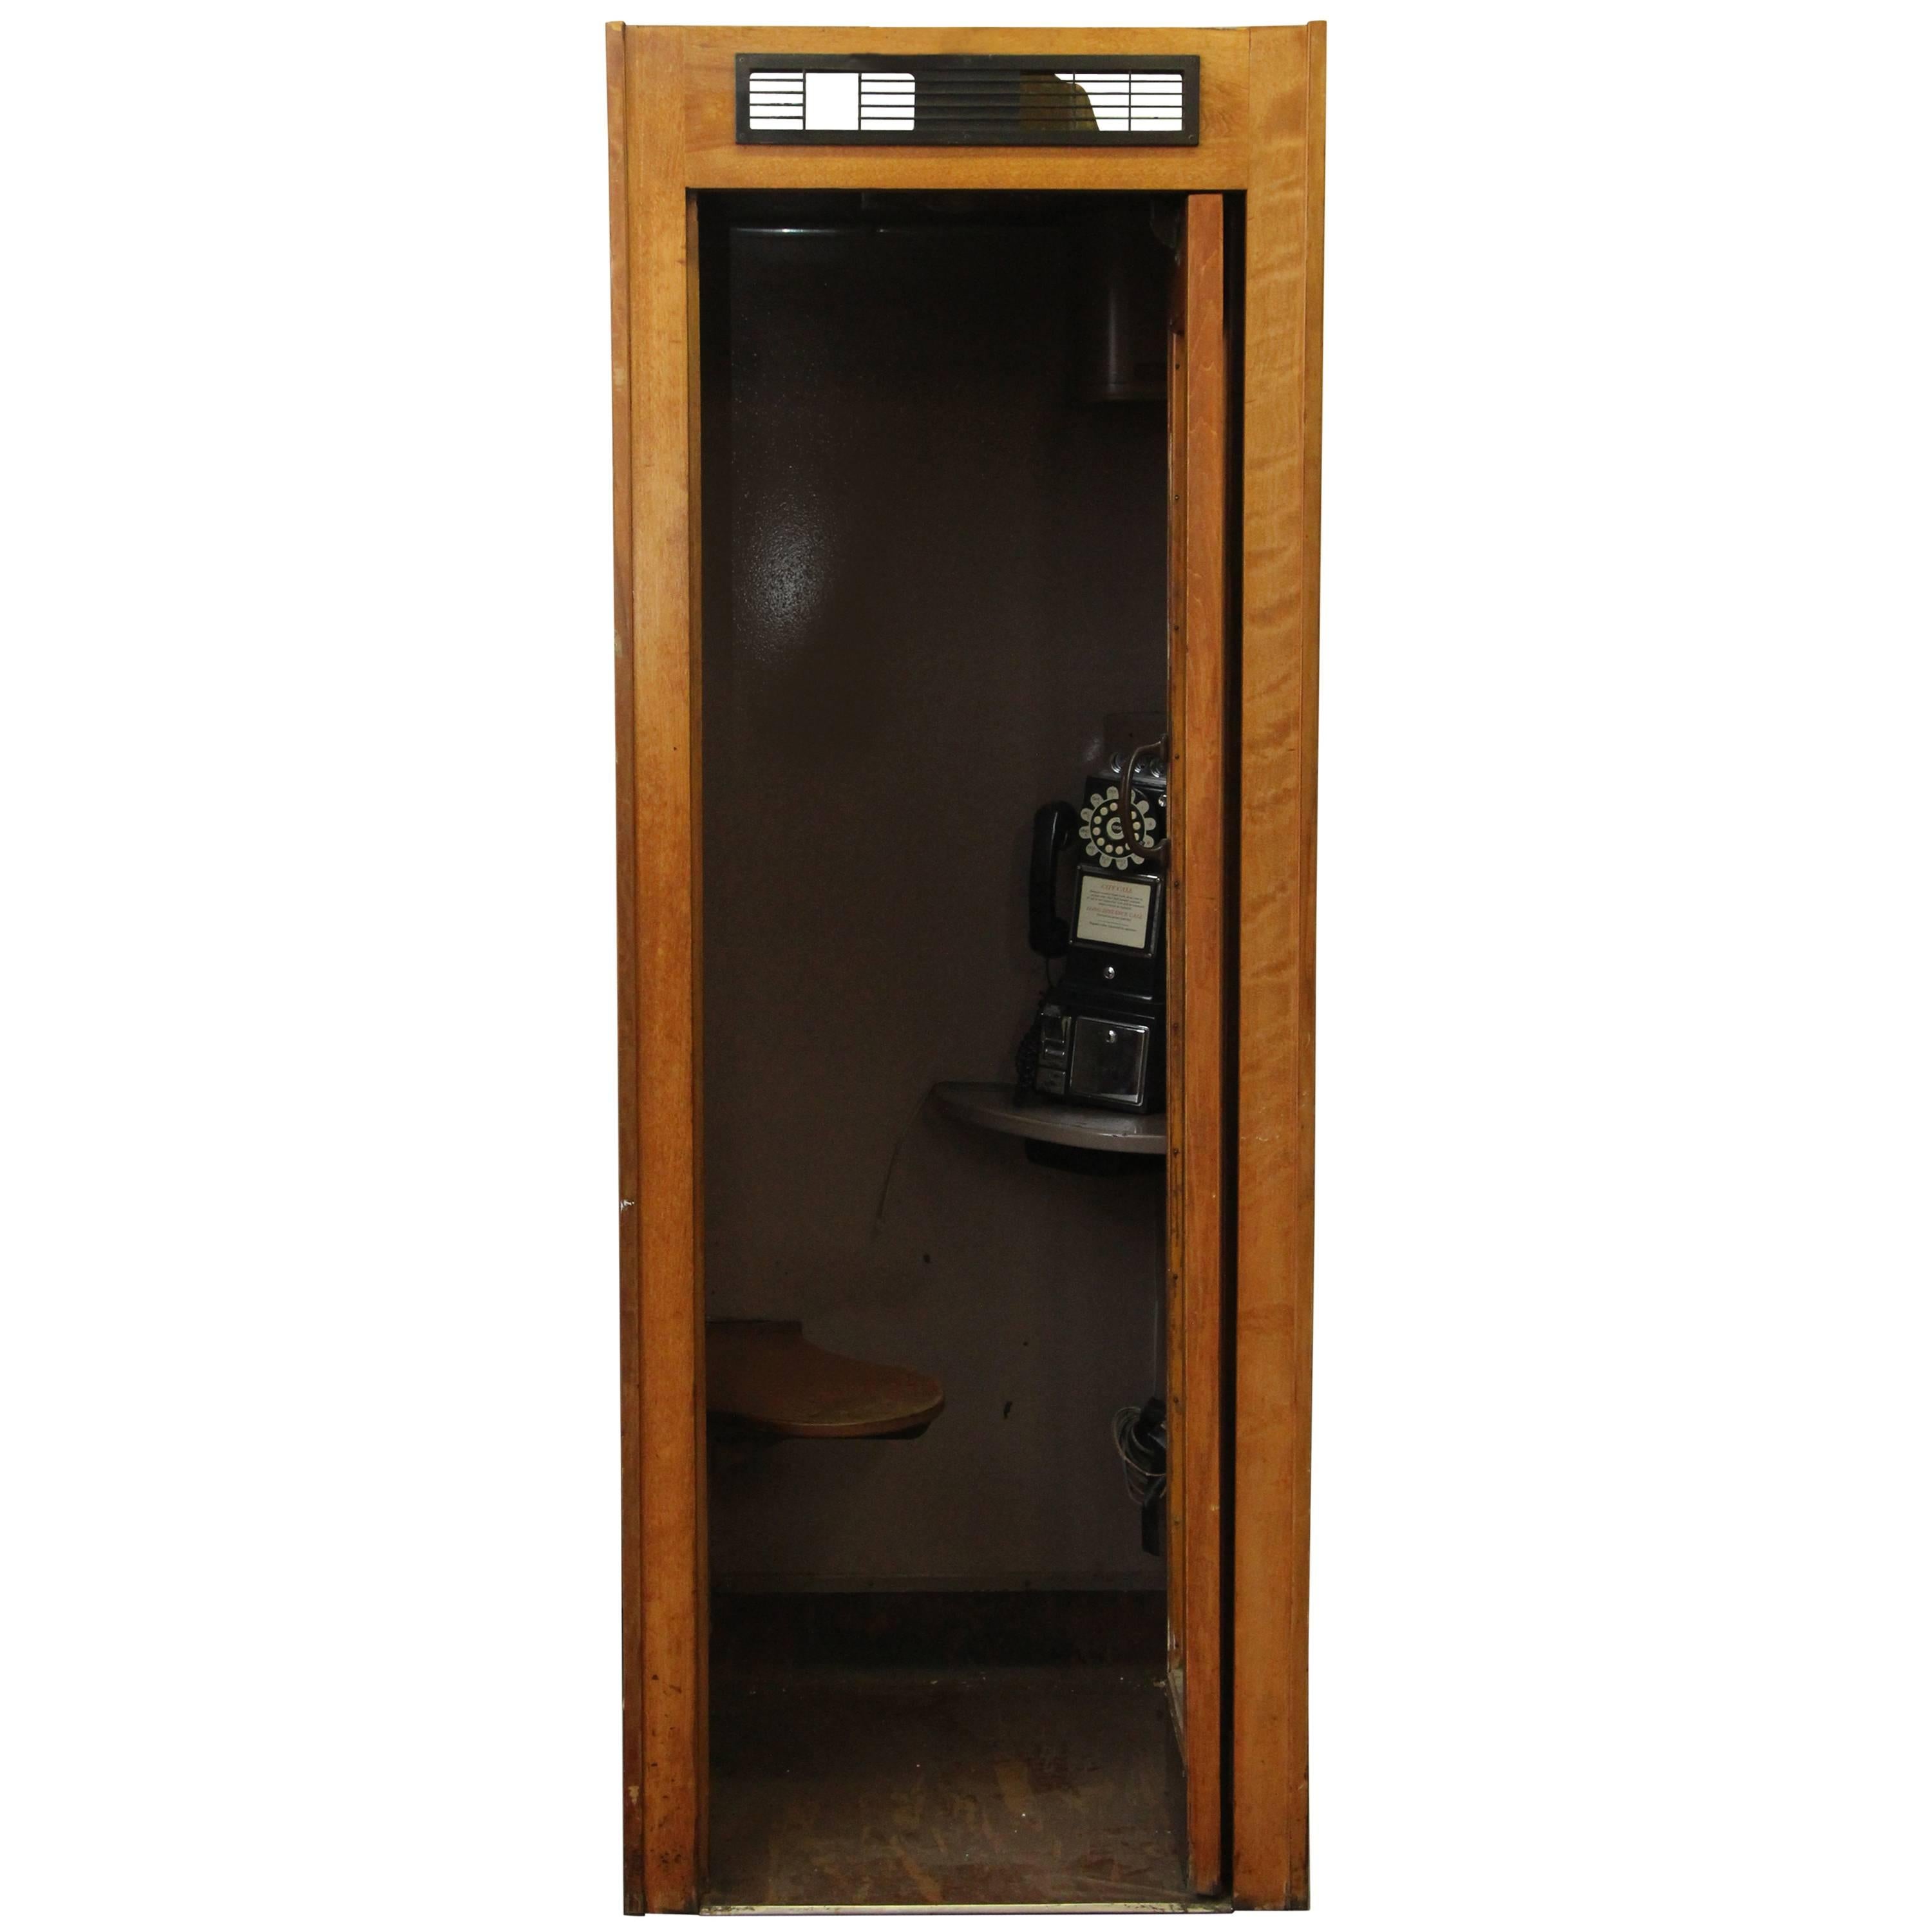 1950s Wooden Phone Booth with Rotary Dial Phone